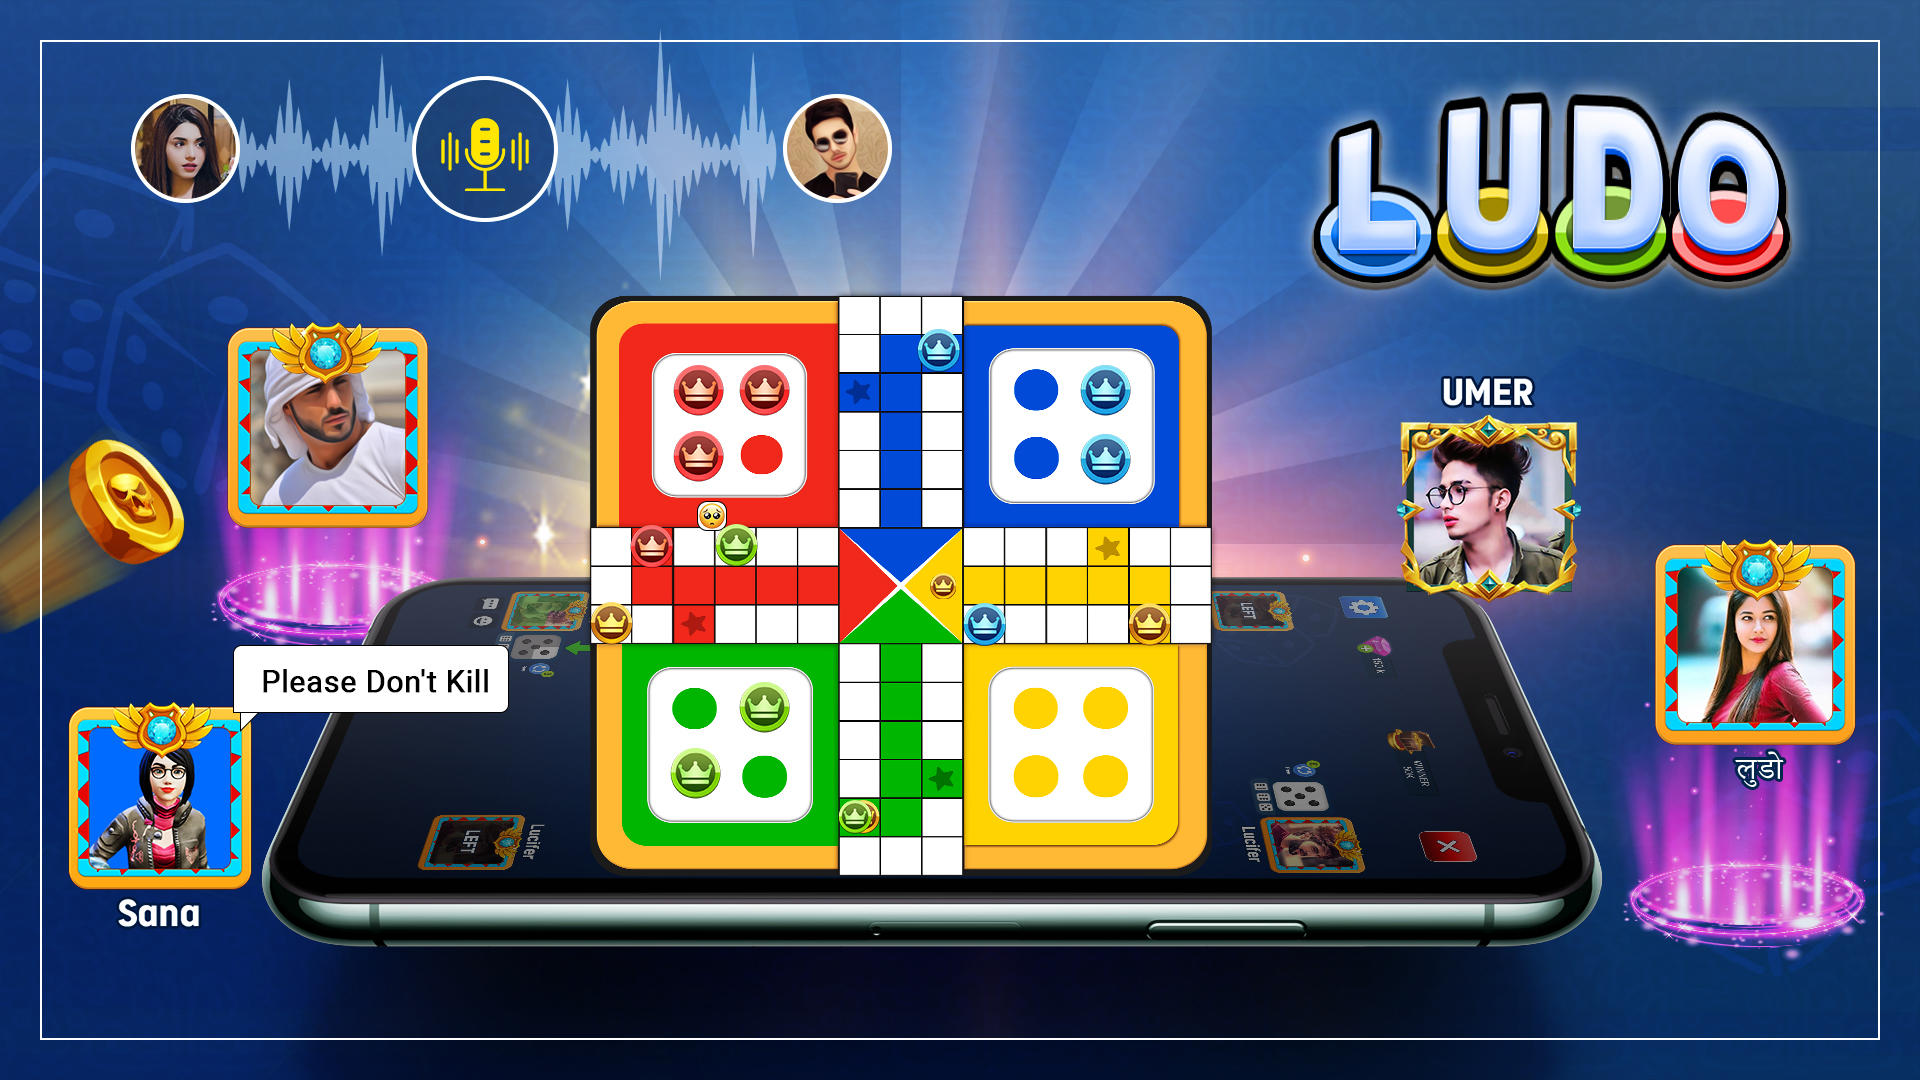 Play Ludo Club - Fun Dice Game Online for Free on PC & Mobile